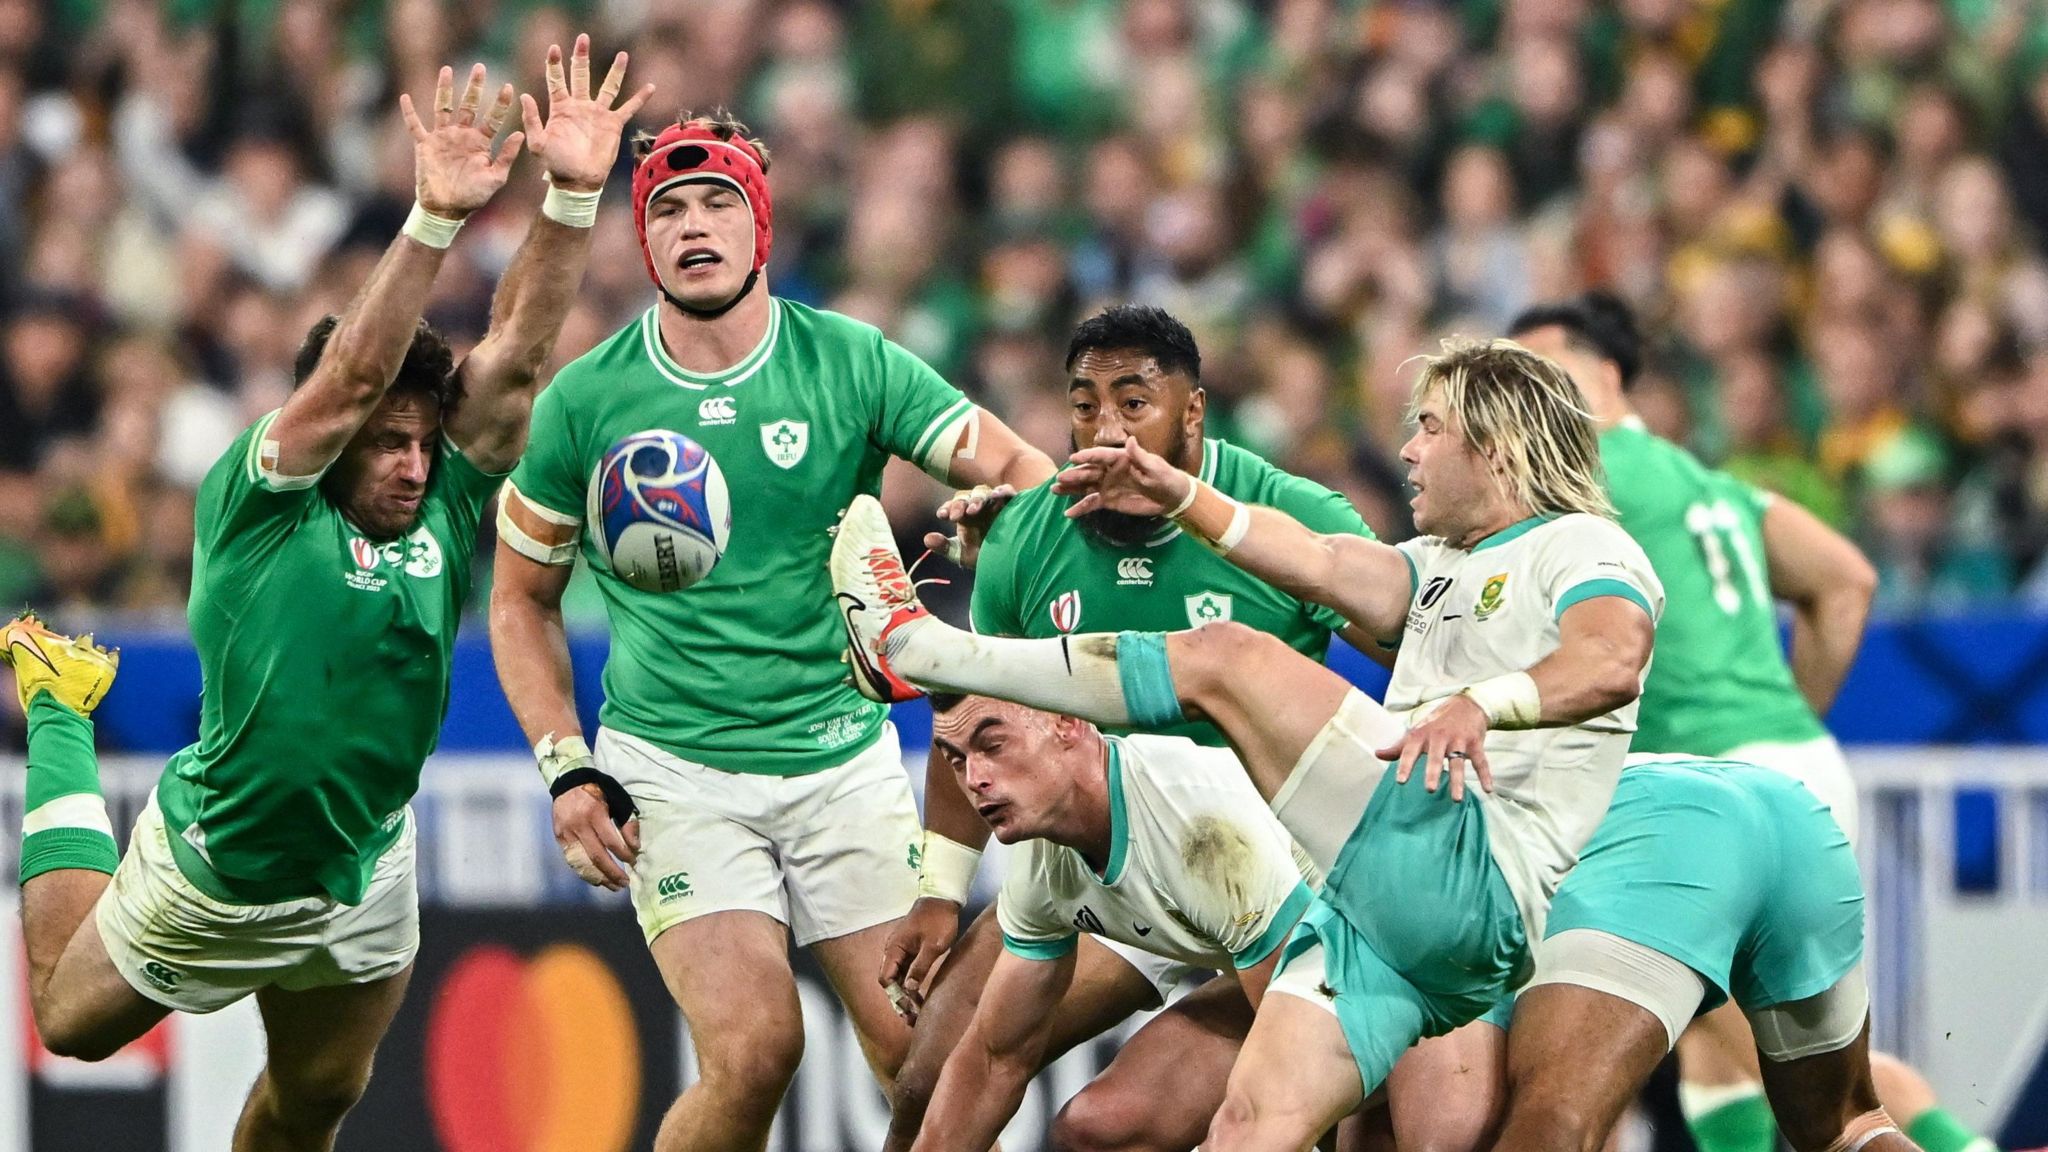 Action from Ireland's win over South Africa at the 2023 Rugby World Cup at Stade de France, Paris